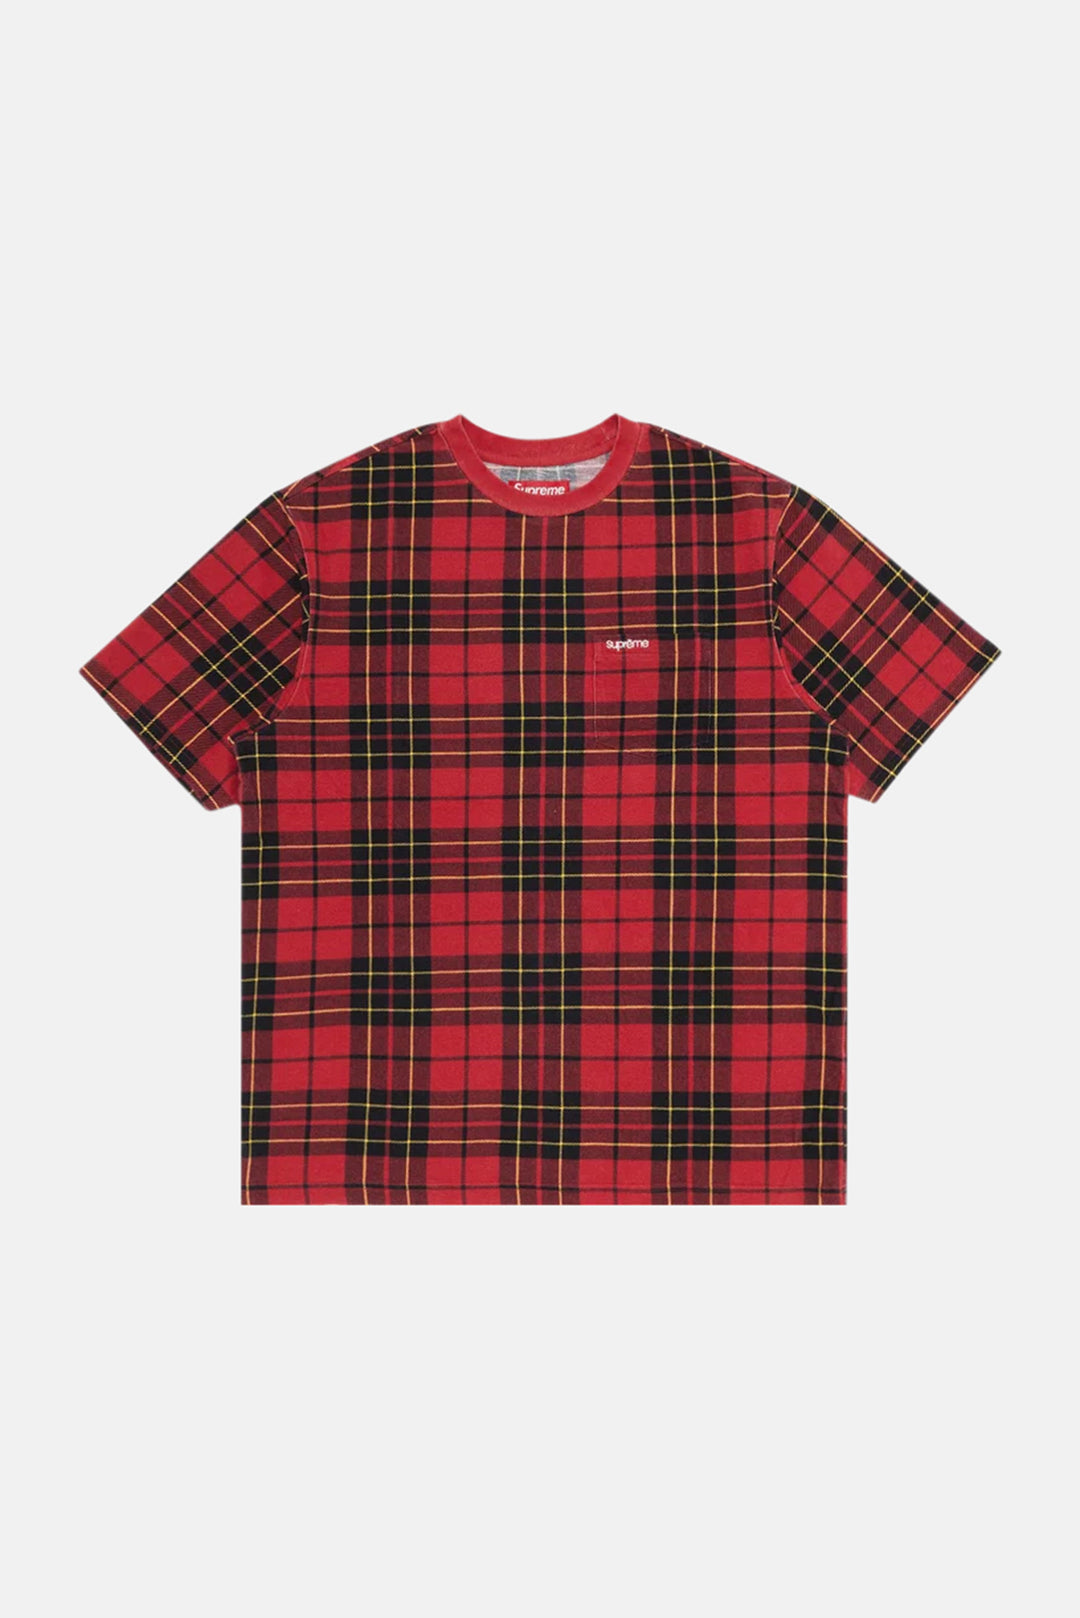 S/S Pocket Tee Red Plaid